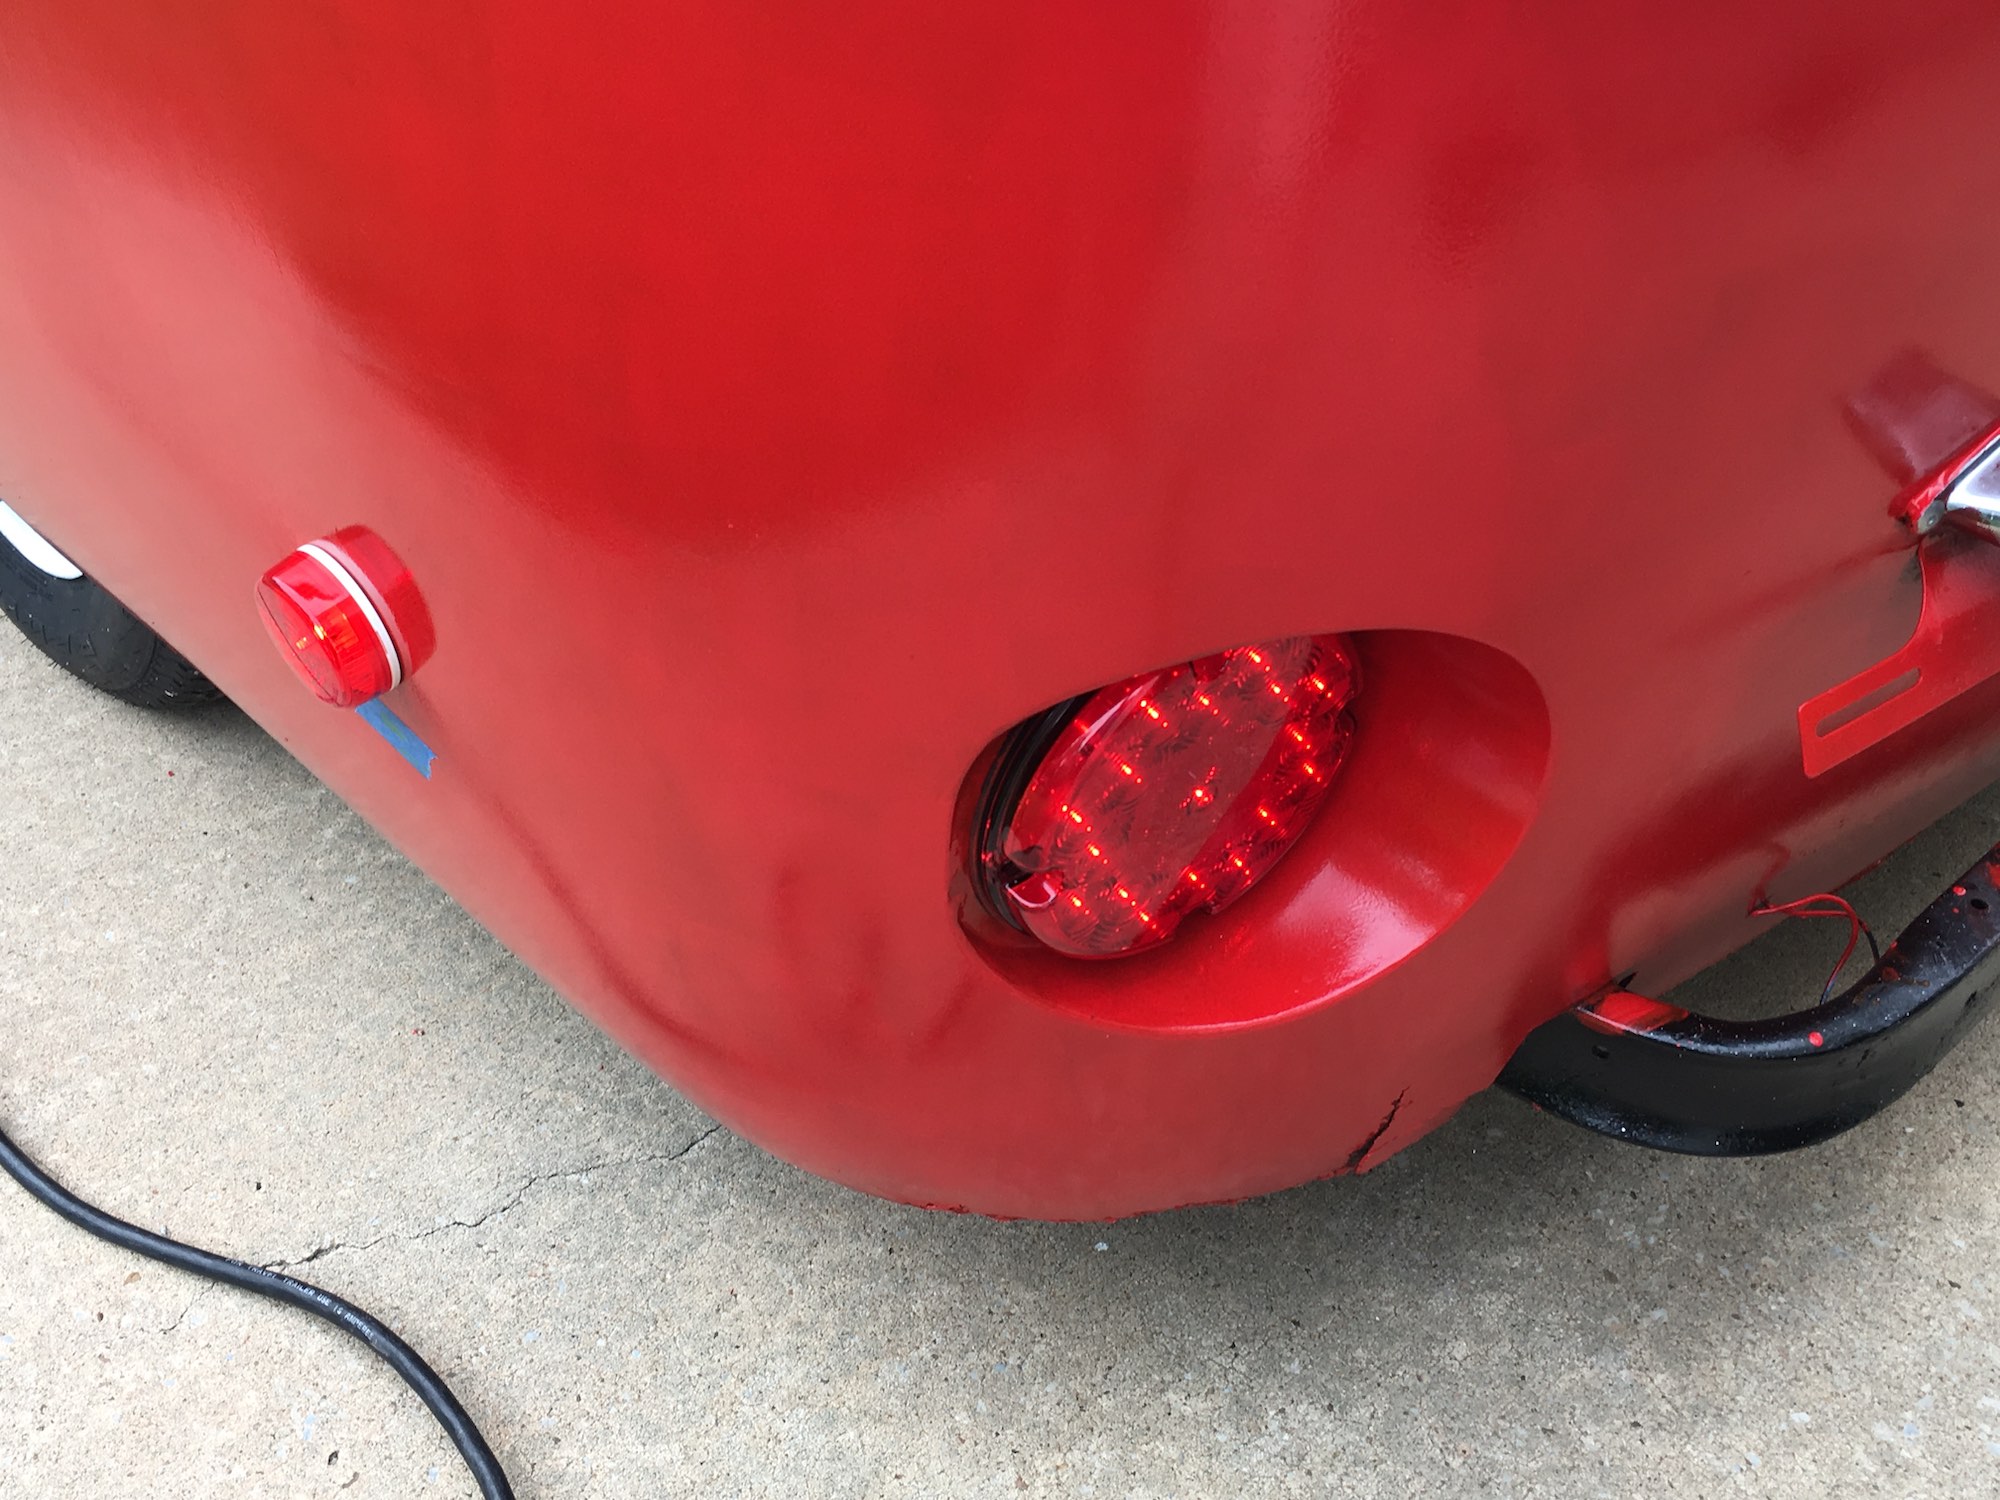 All the exterior lights were upgraded to modern LED versions. Yes, that's another tiny bit of fiberglass damage by the bumper. It's 50 years old, it's picked up some scrapes.